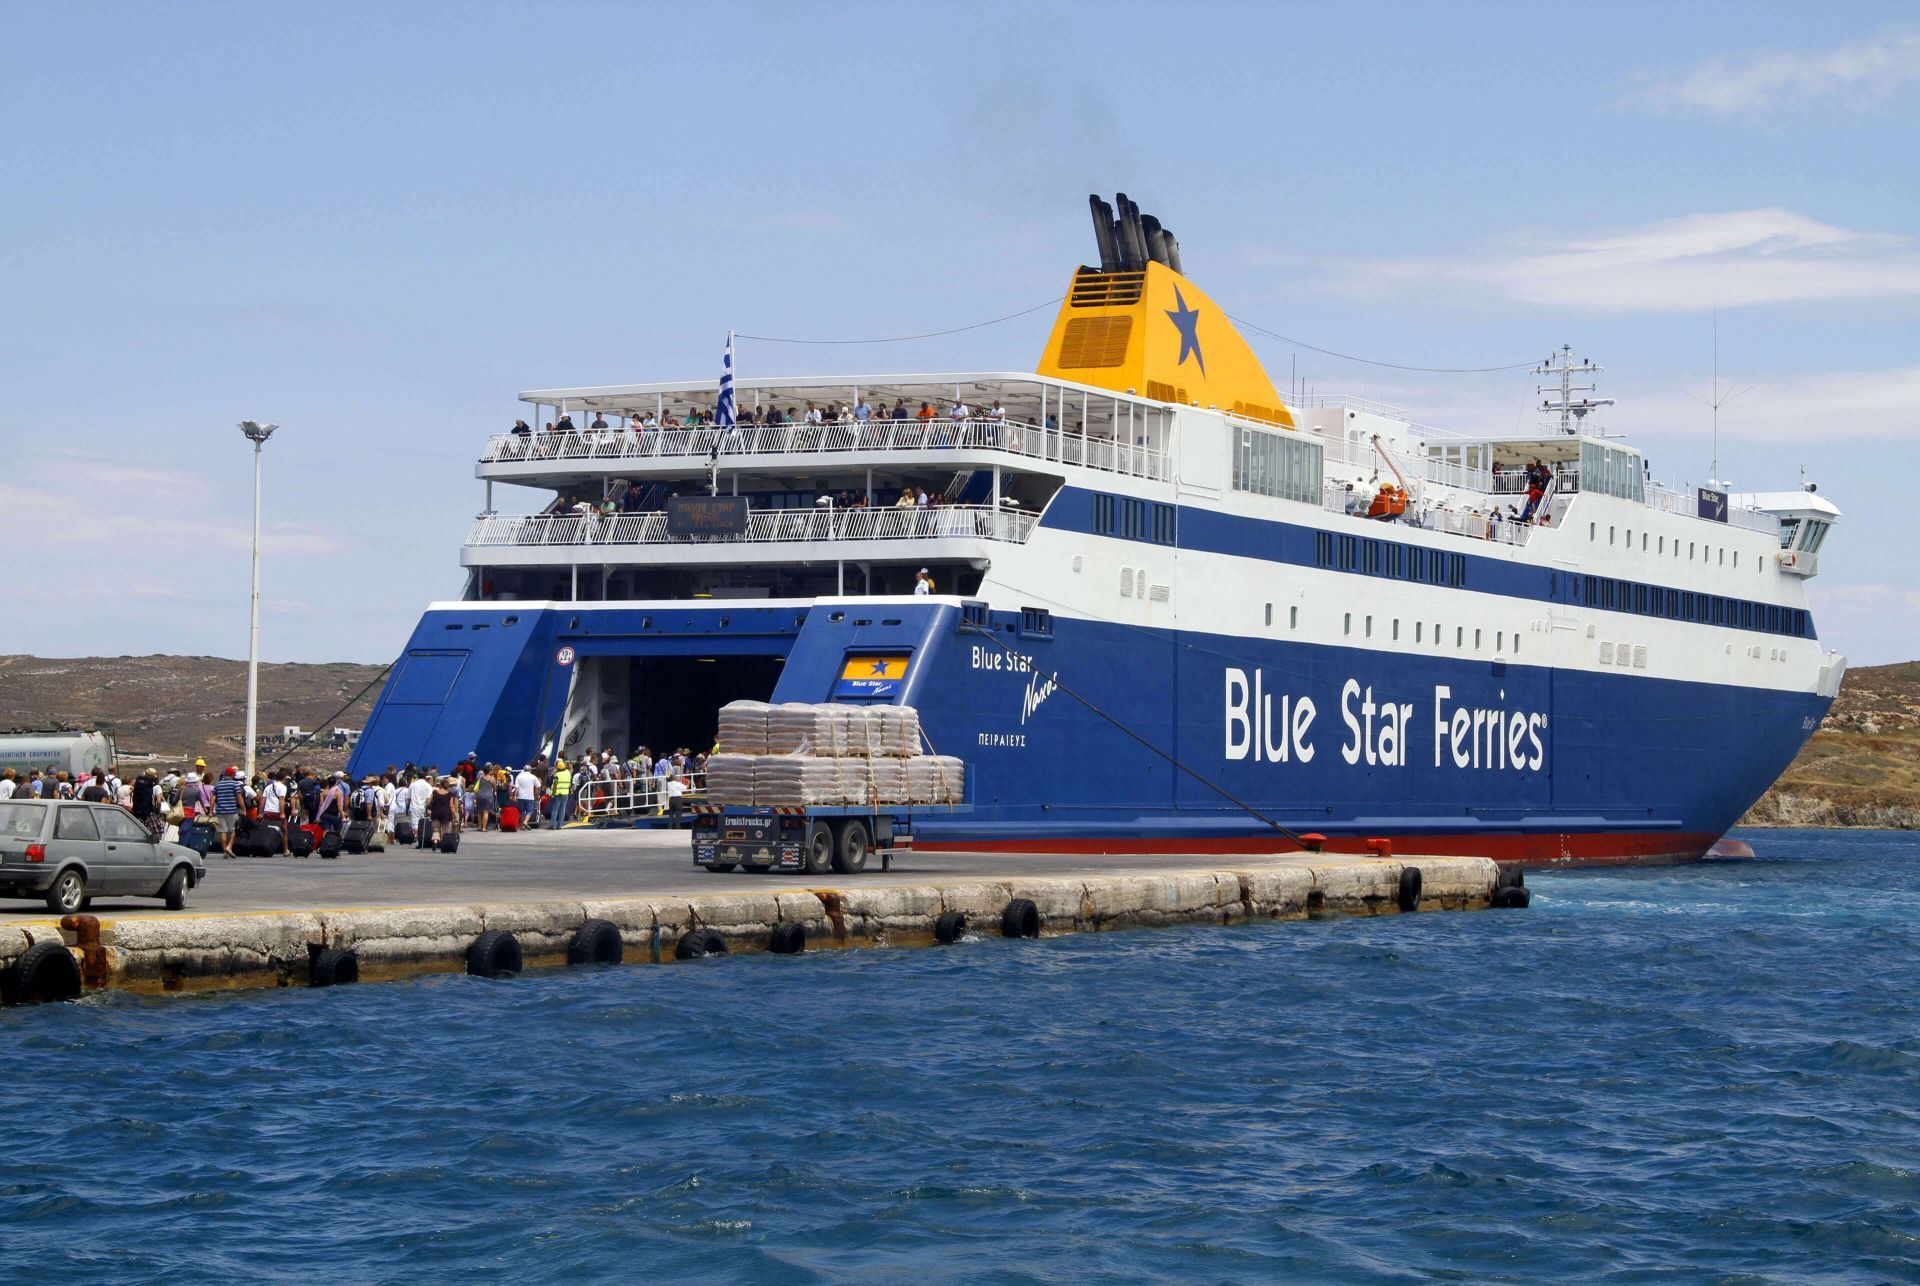 Ferry Athens - Ferry Tickets - Online Booking